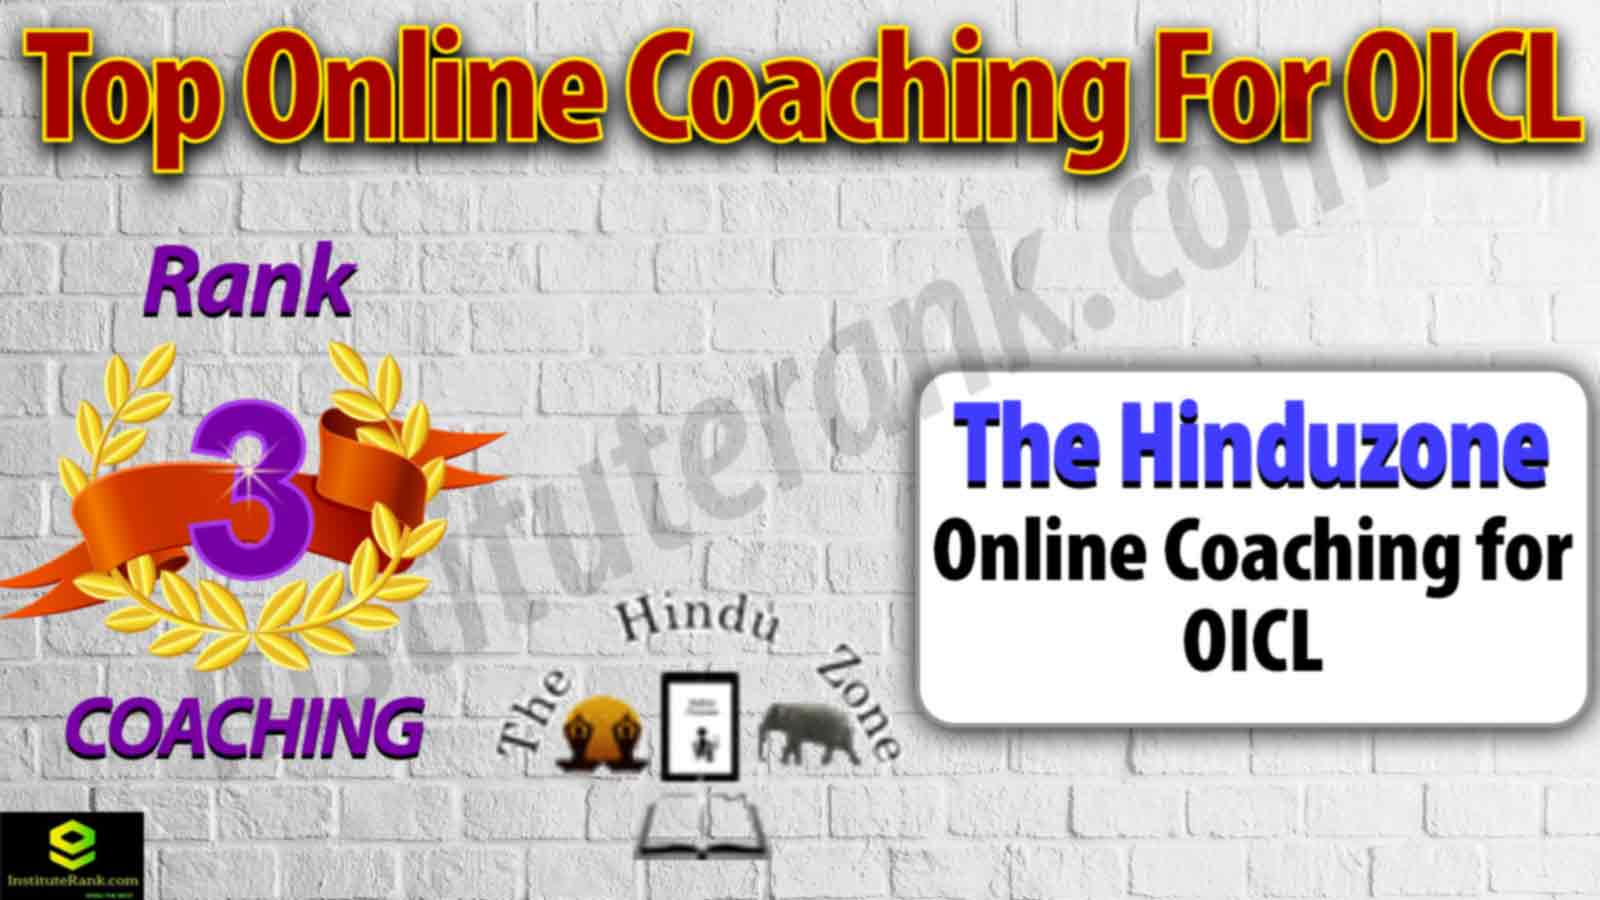 Best Online Coaching Preparation for OICL Examination